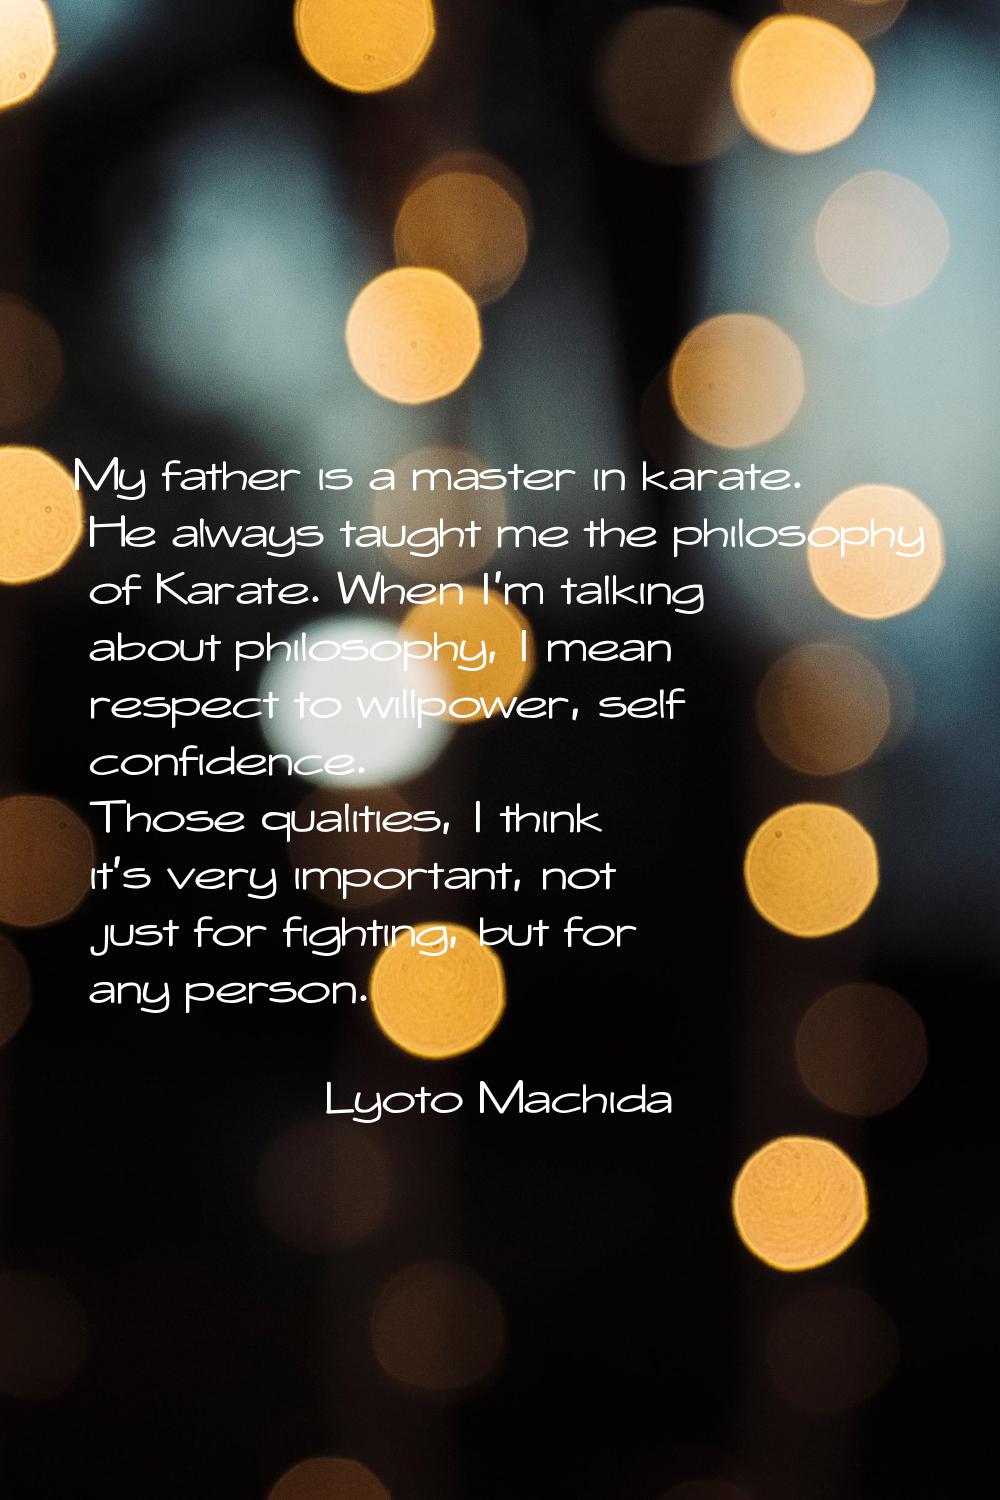 My father is a master in karate. He always taught me the philosophy of Karate. When I'm talking abo